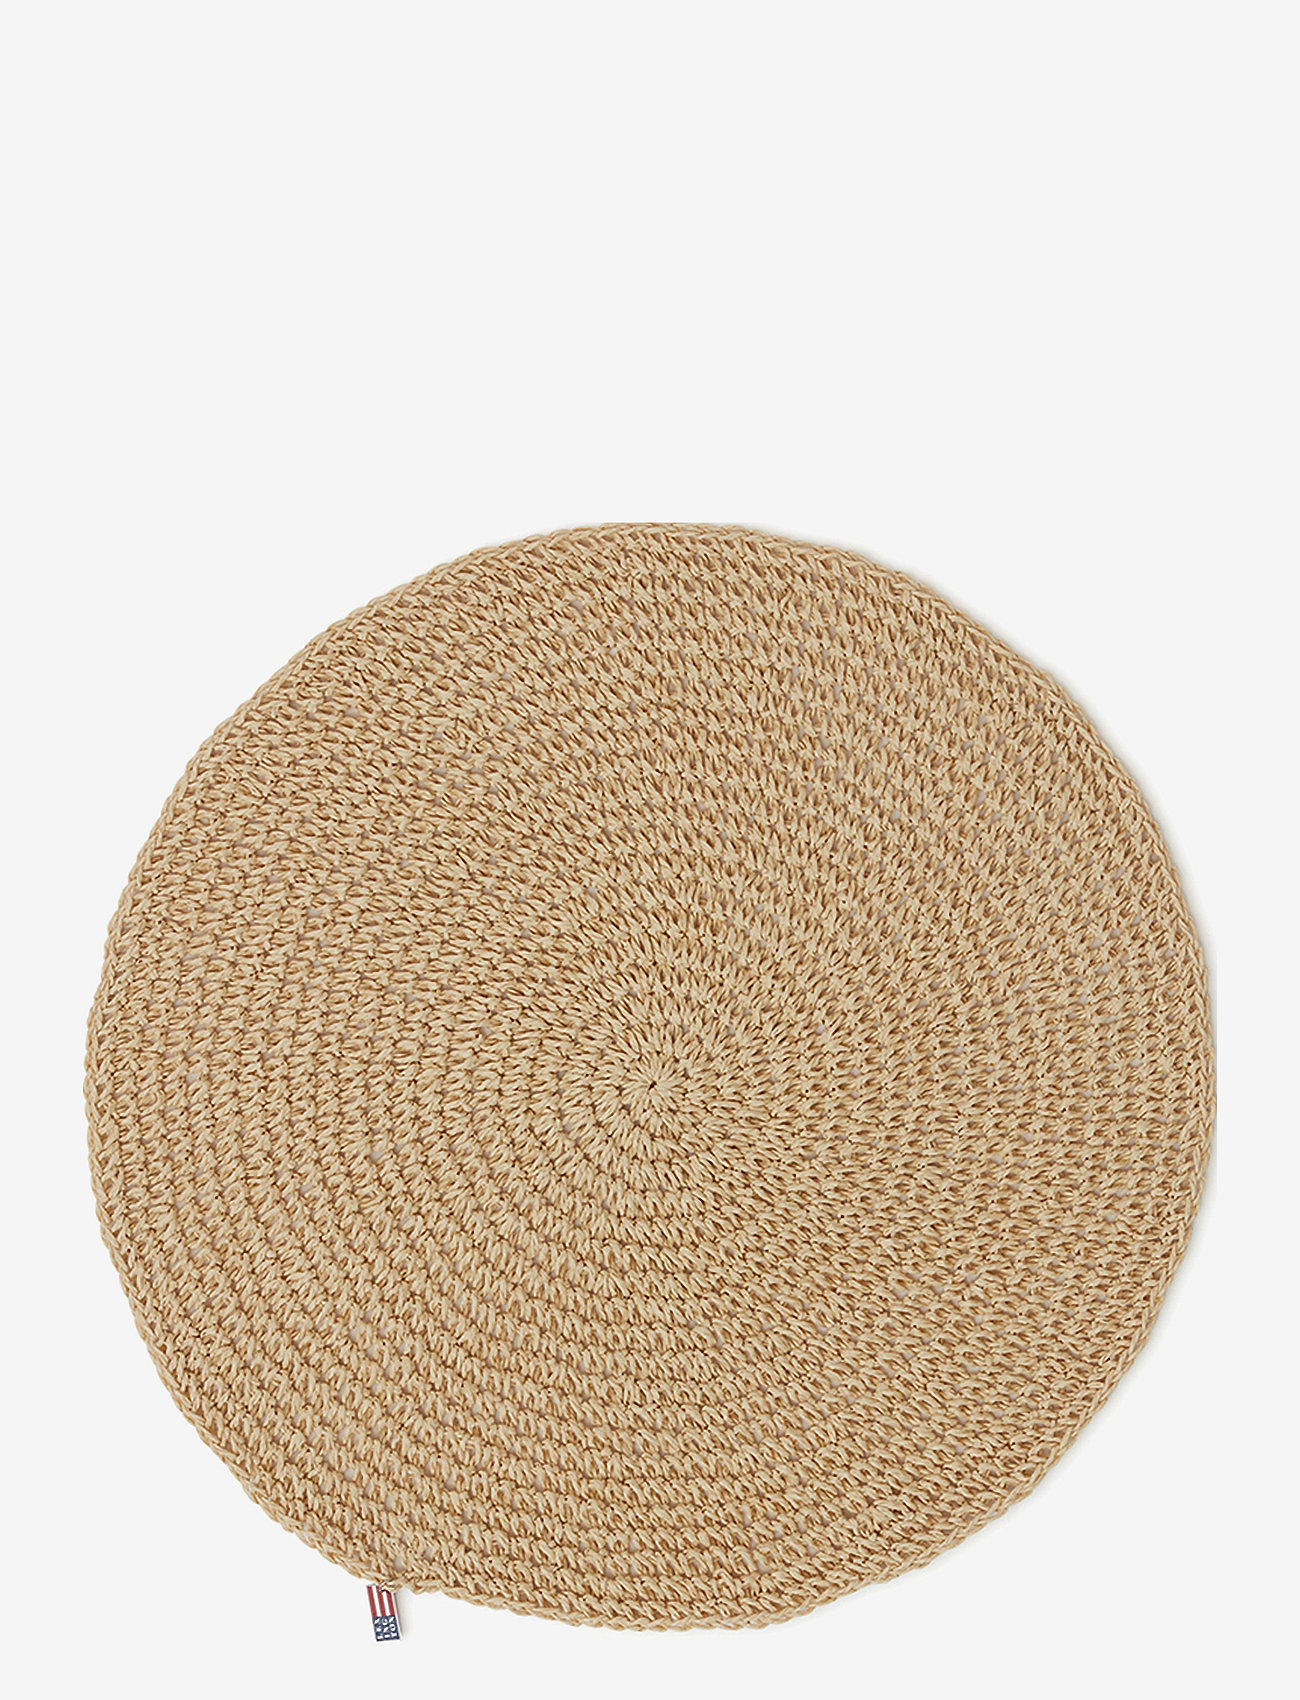 Lexington Home - Round Recycled Paper Straw Placemat - die niedrigsten preise - natural - 0